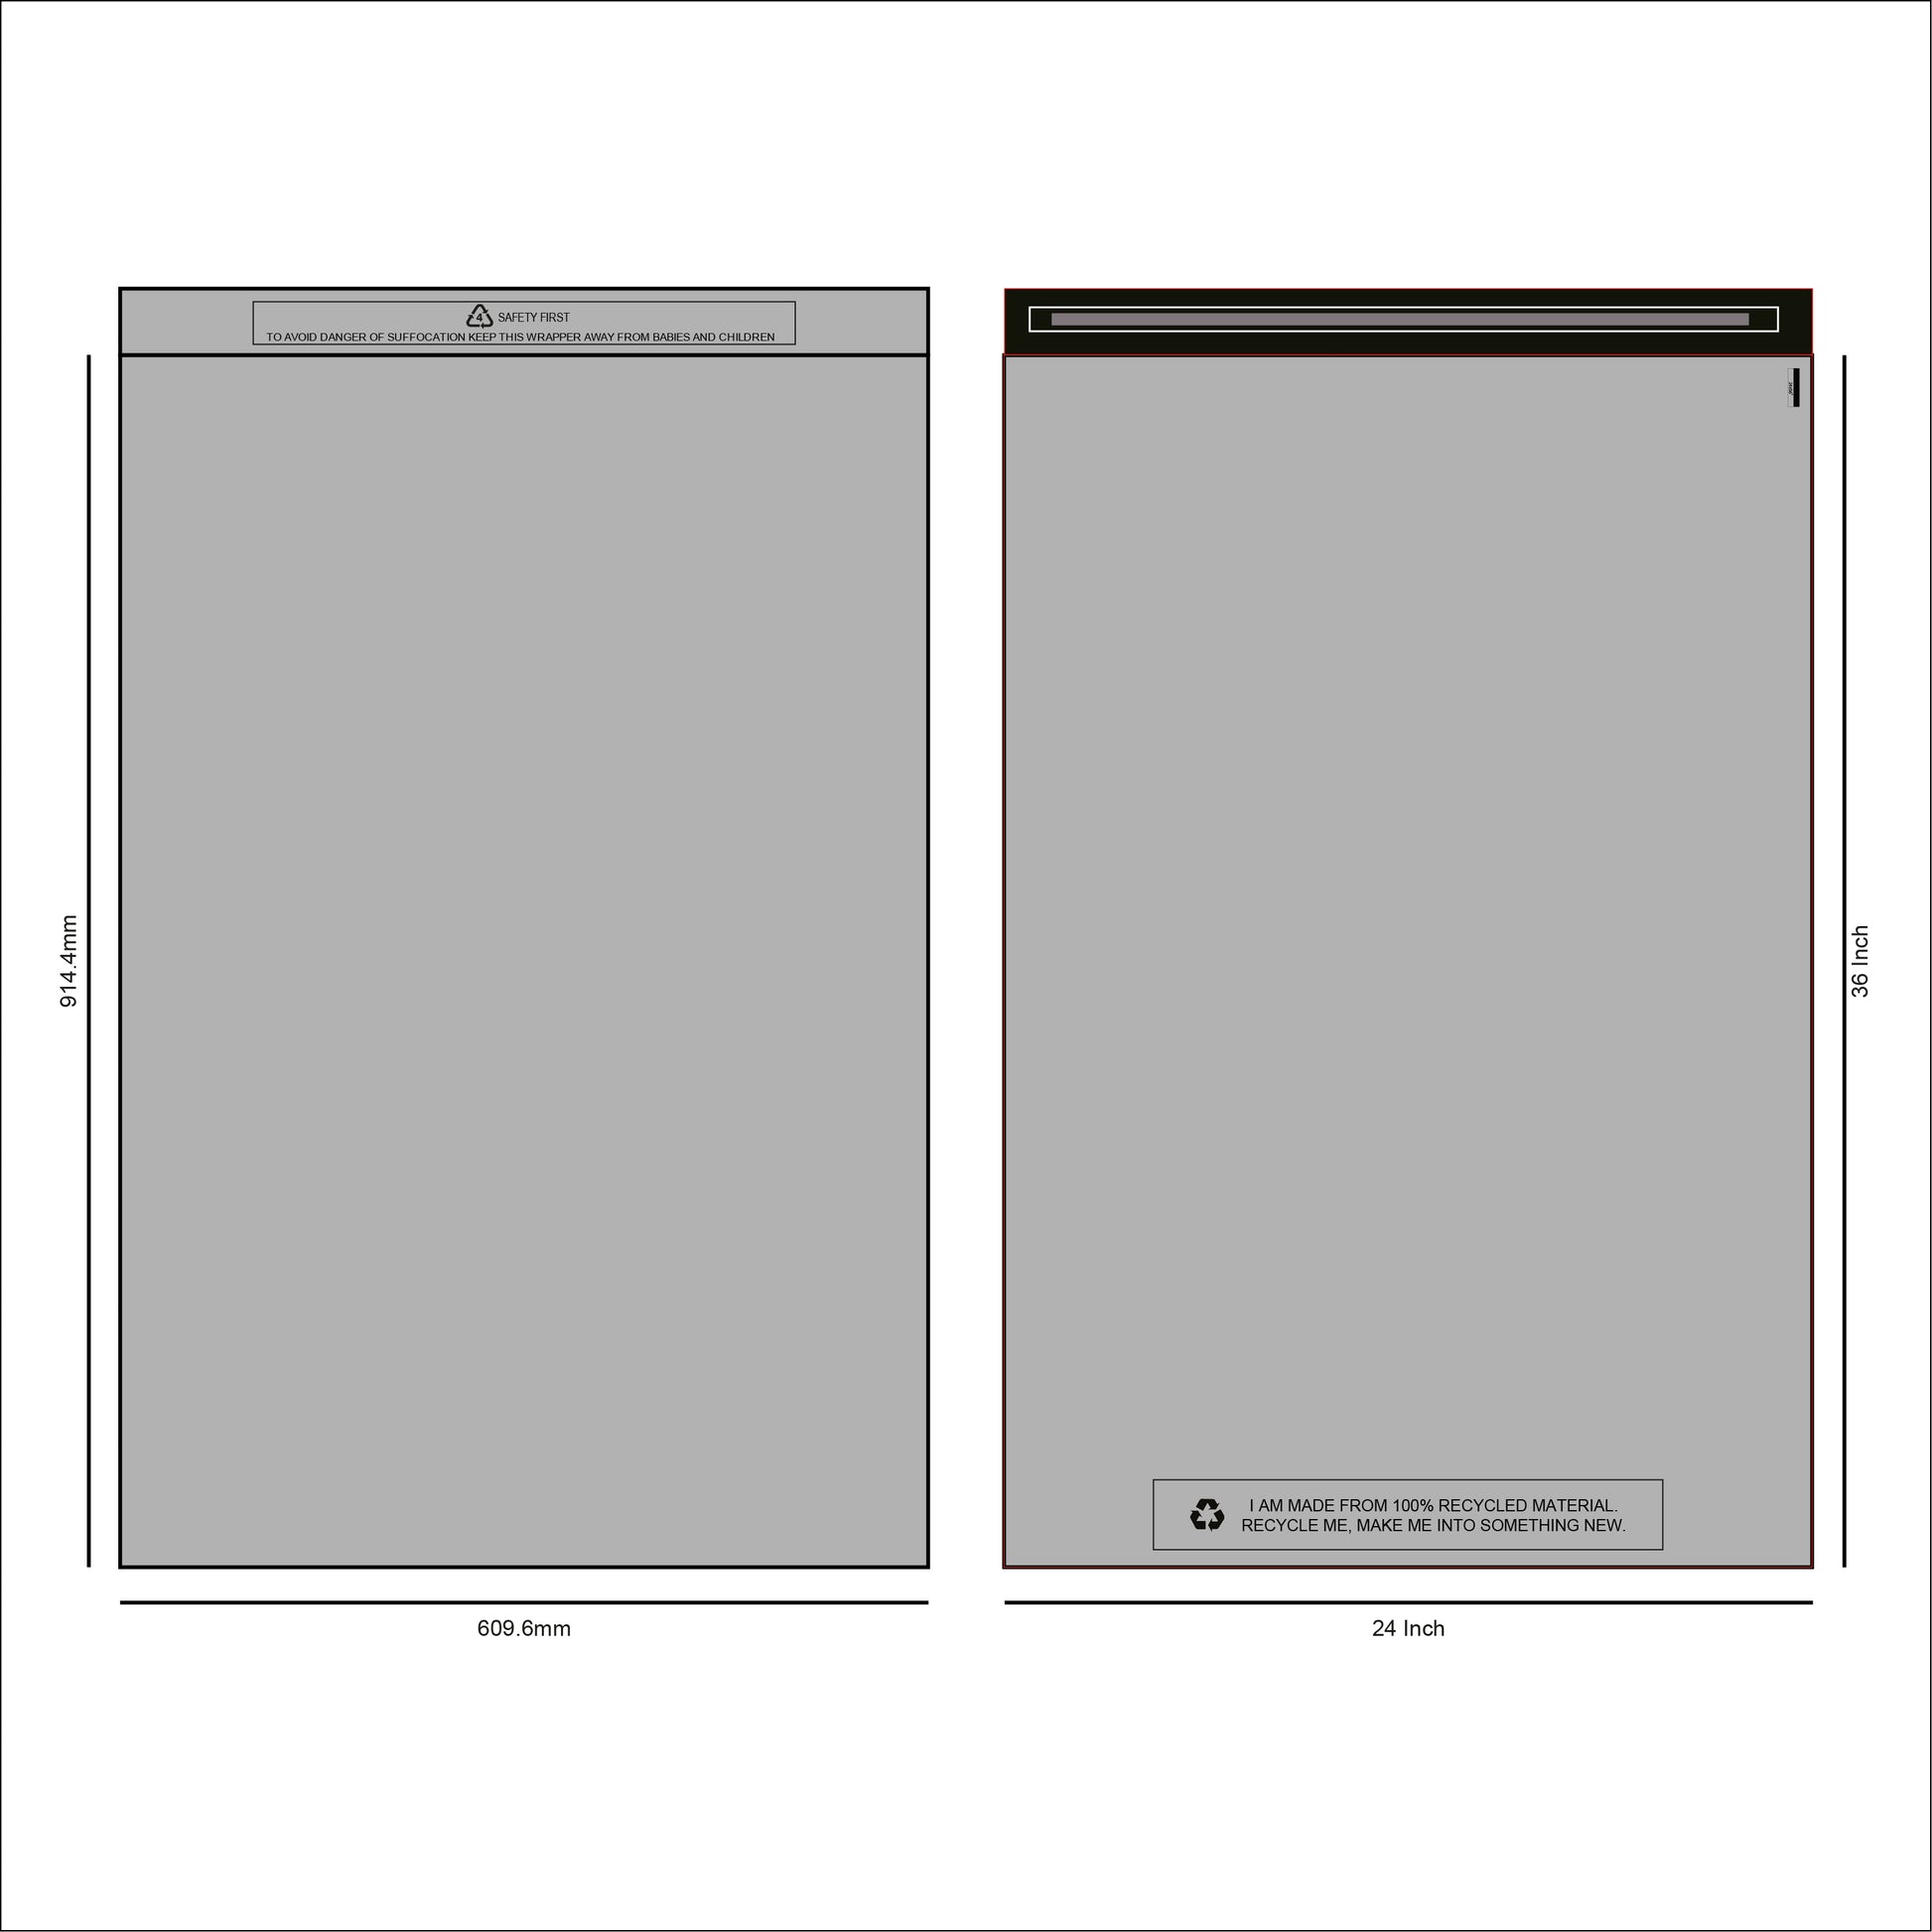 Design of Grey recycled Mail Bag 24 x 36 inches for packaging products